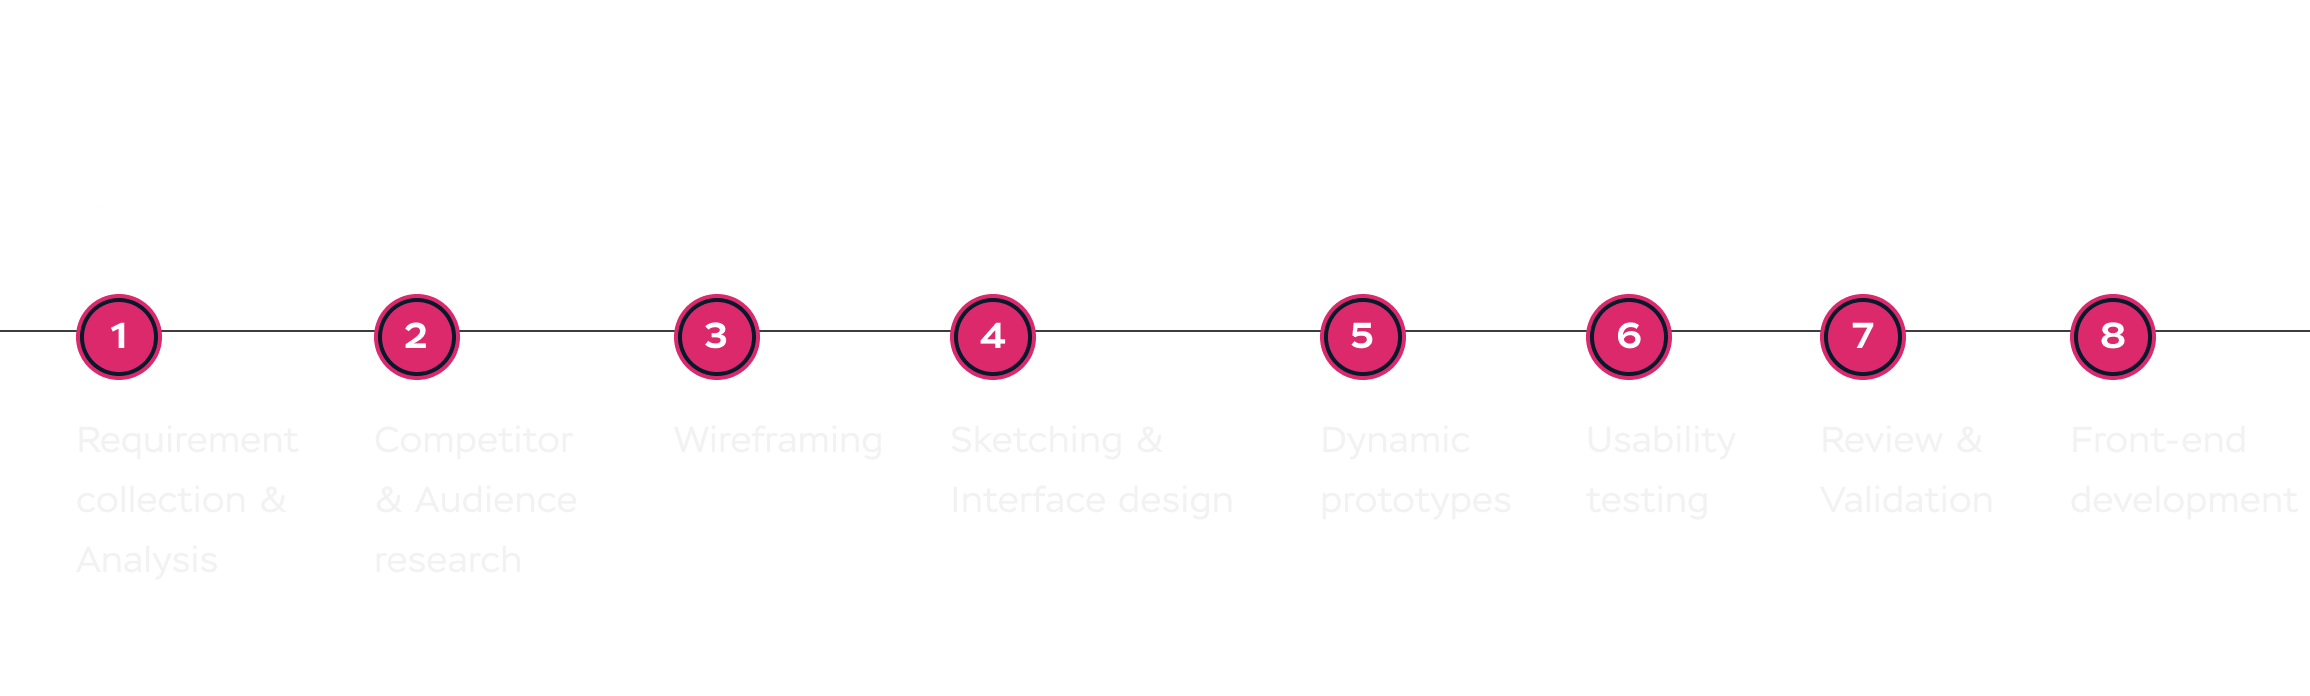 A pipeline shows the steps of creating a design. They are Requirement collection, Competitor & Audience research, Wireframing, Sketching & Interface design, Dynamic prototypes, Usability testing, Review & Validation, and Front-end development. Steps from Requirement collection & Analysis to Dynamic prototypes are considered UX design. The Sketching & Interface design step is considered UI design.